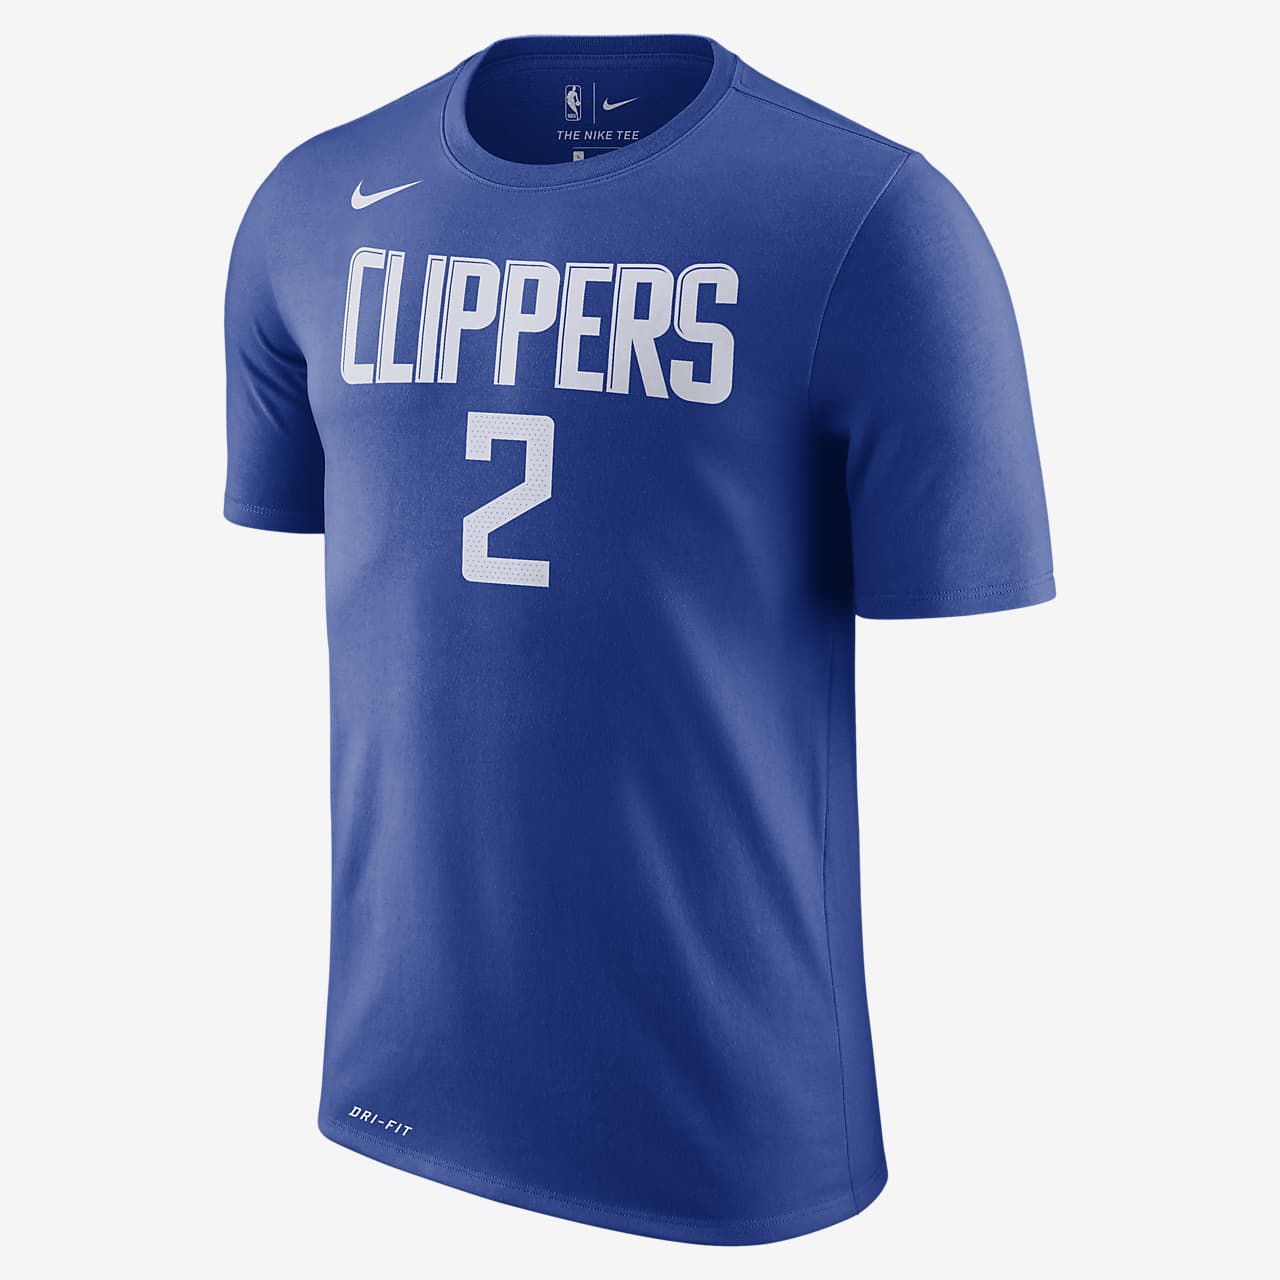 clippers nike t shirt